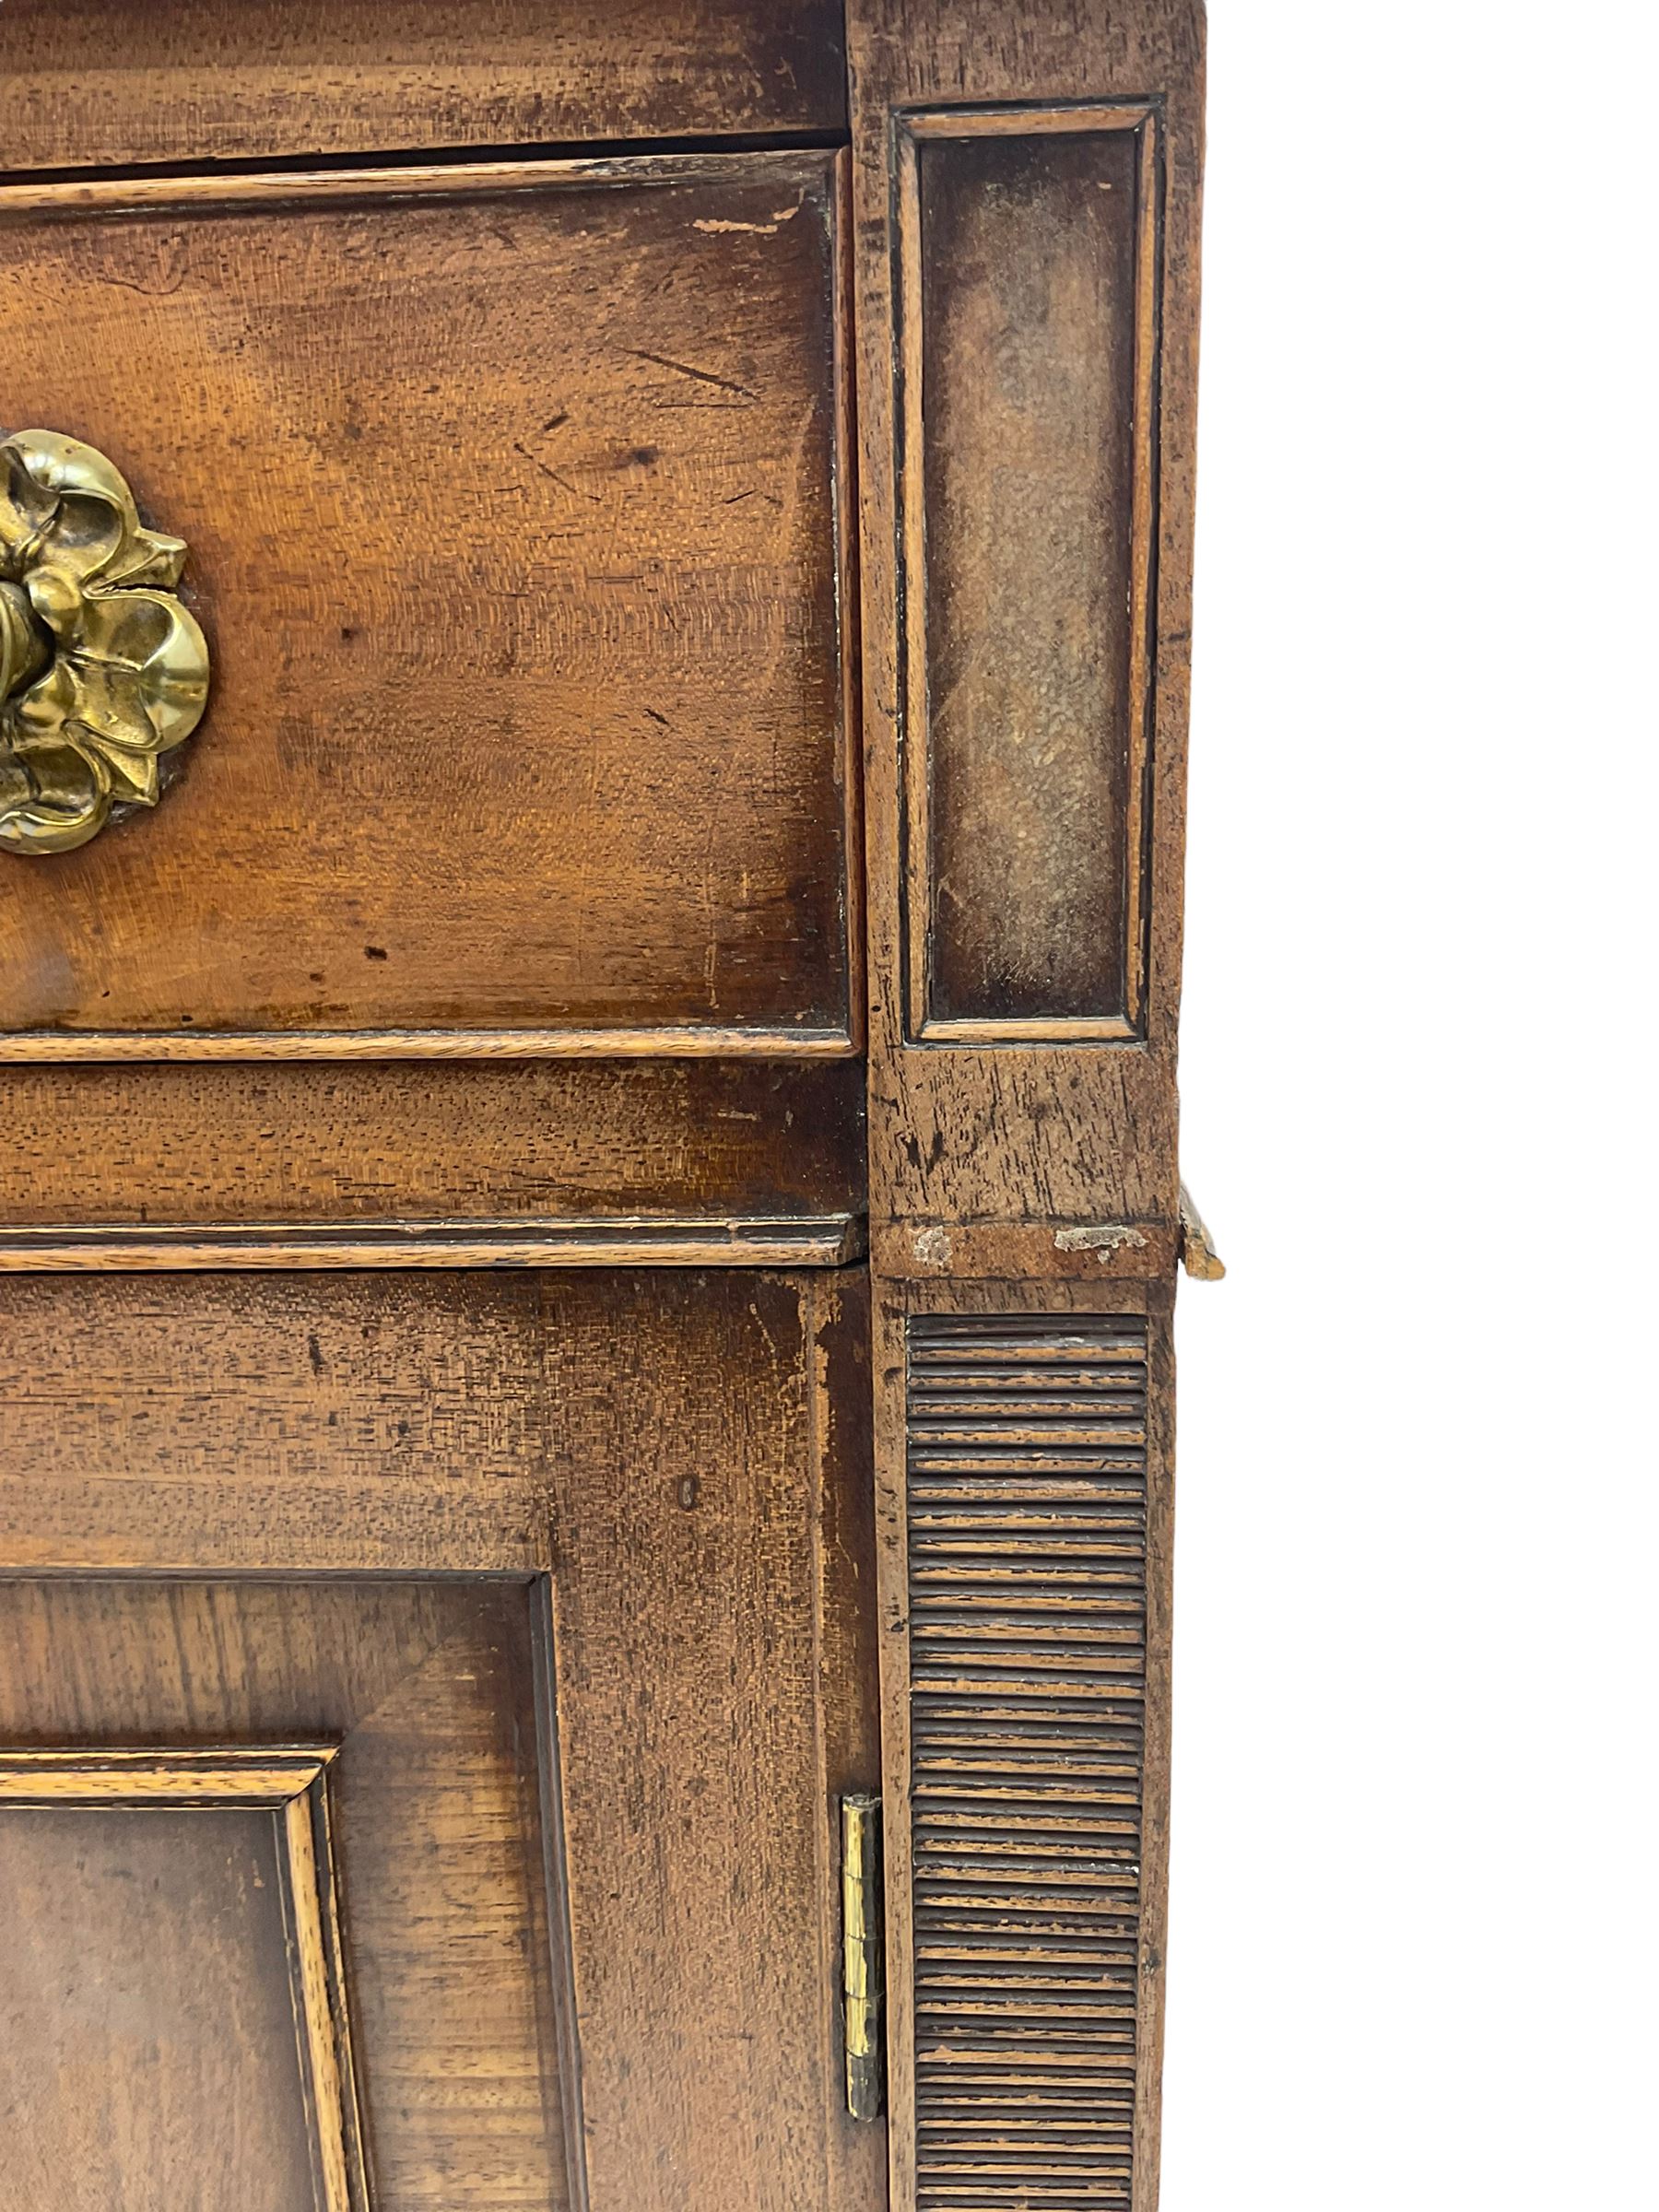 Regency period mahogany side cabinet - Image 10 of 10